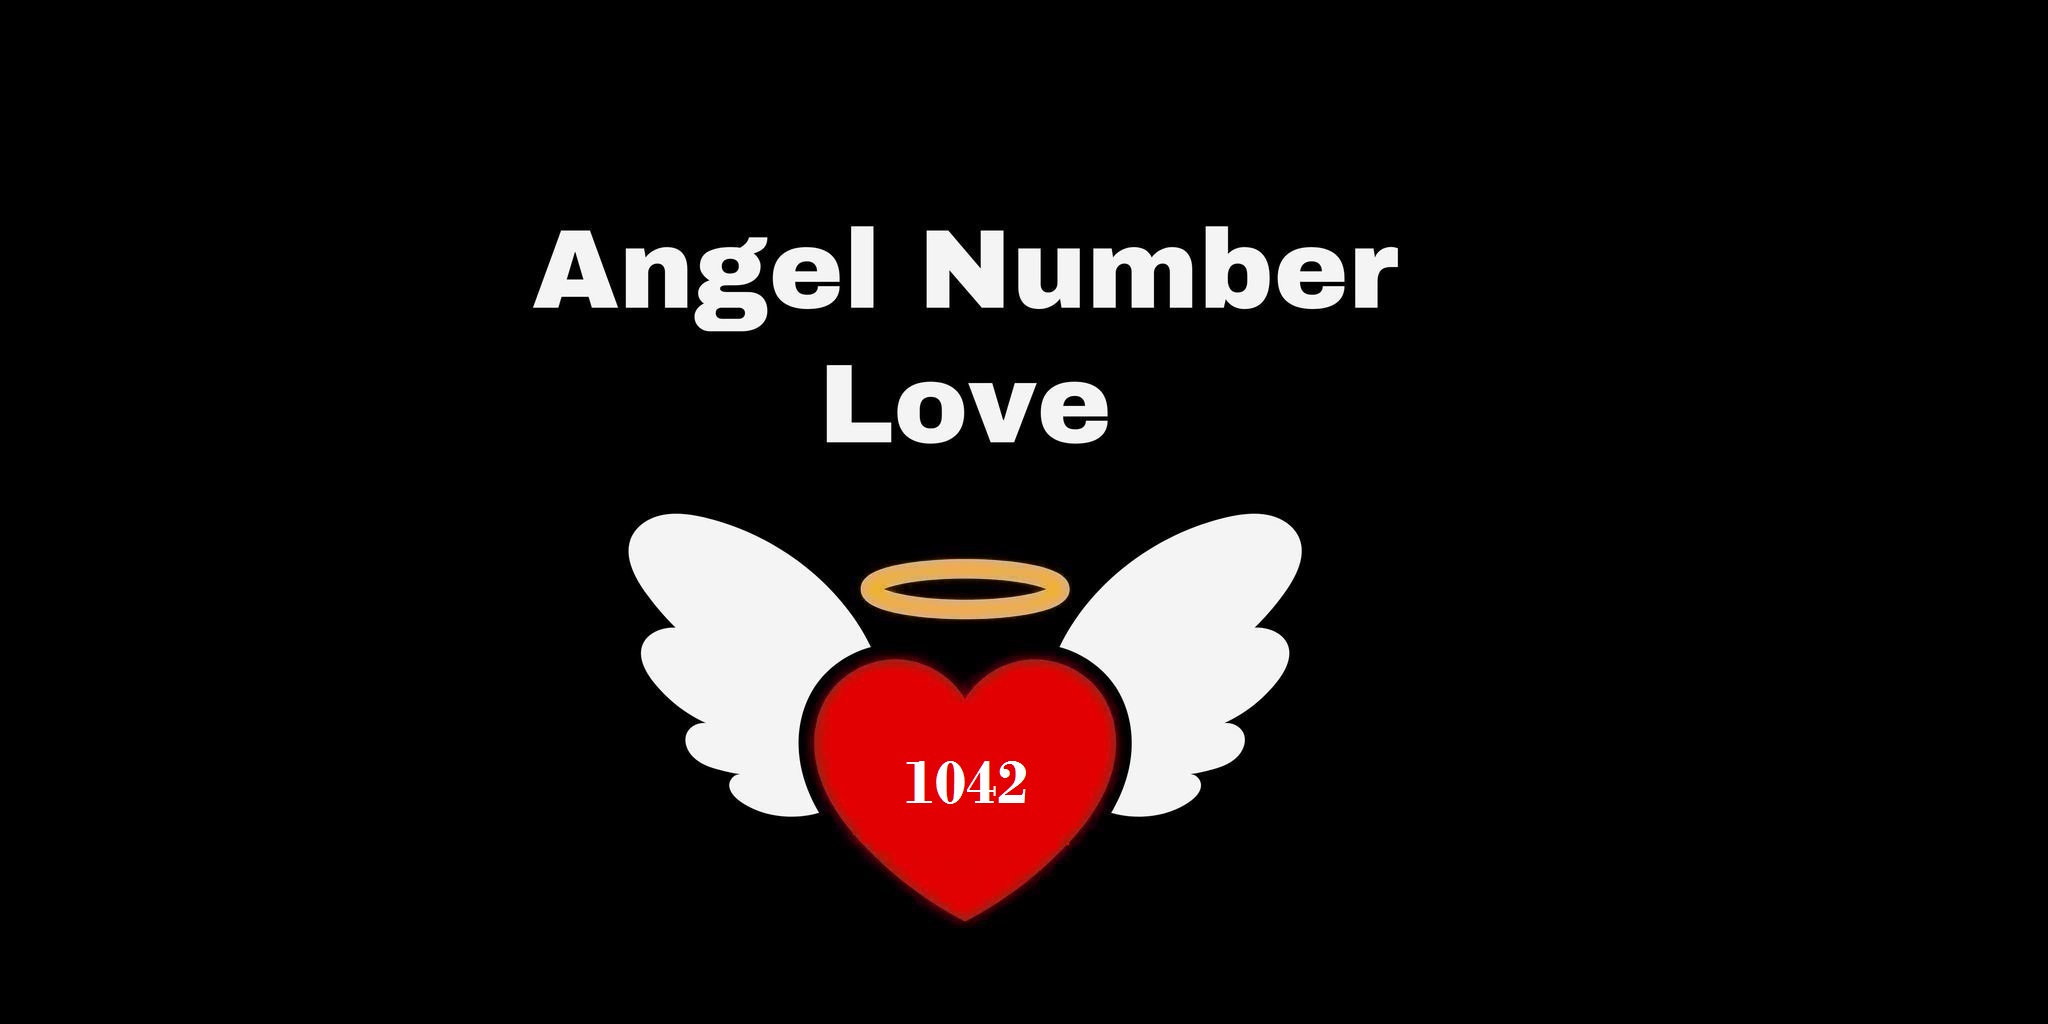 1042 Angel Number Meaning In Love